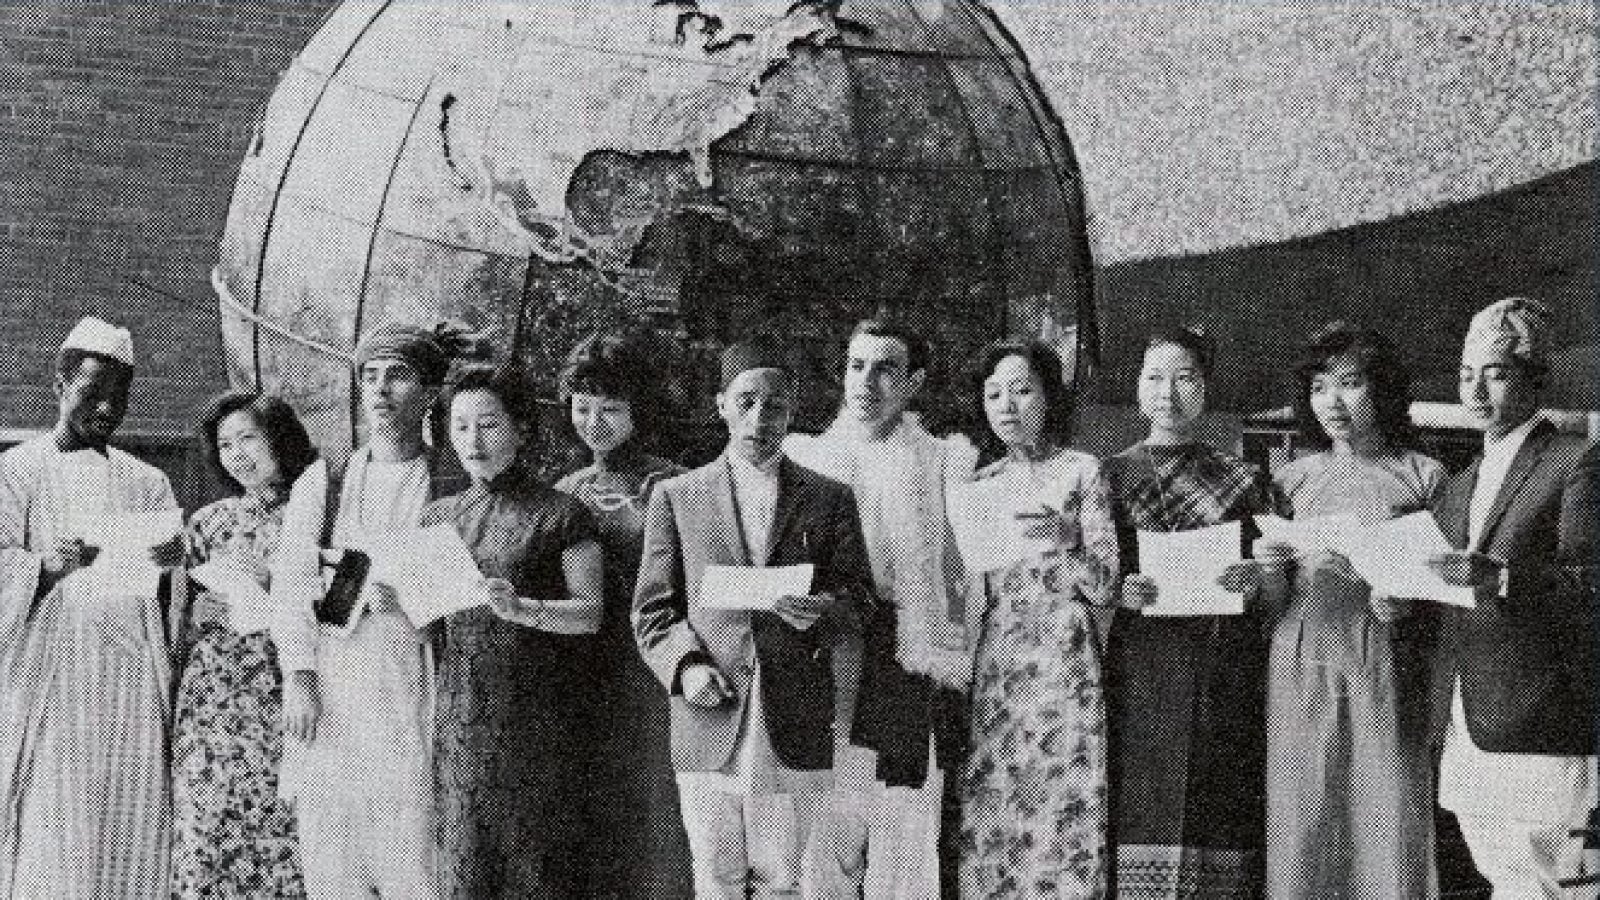 Black and white of a group of international students in their national dress in front of the historic SFS globe.